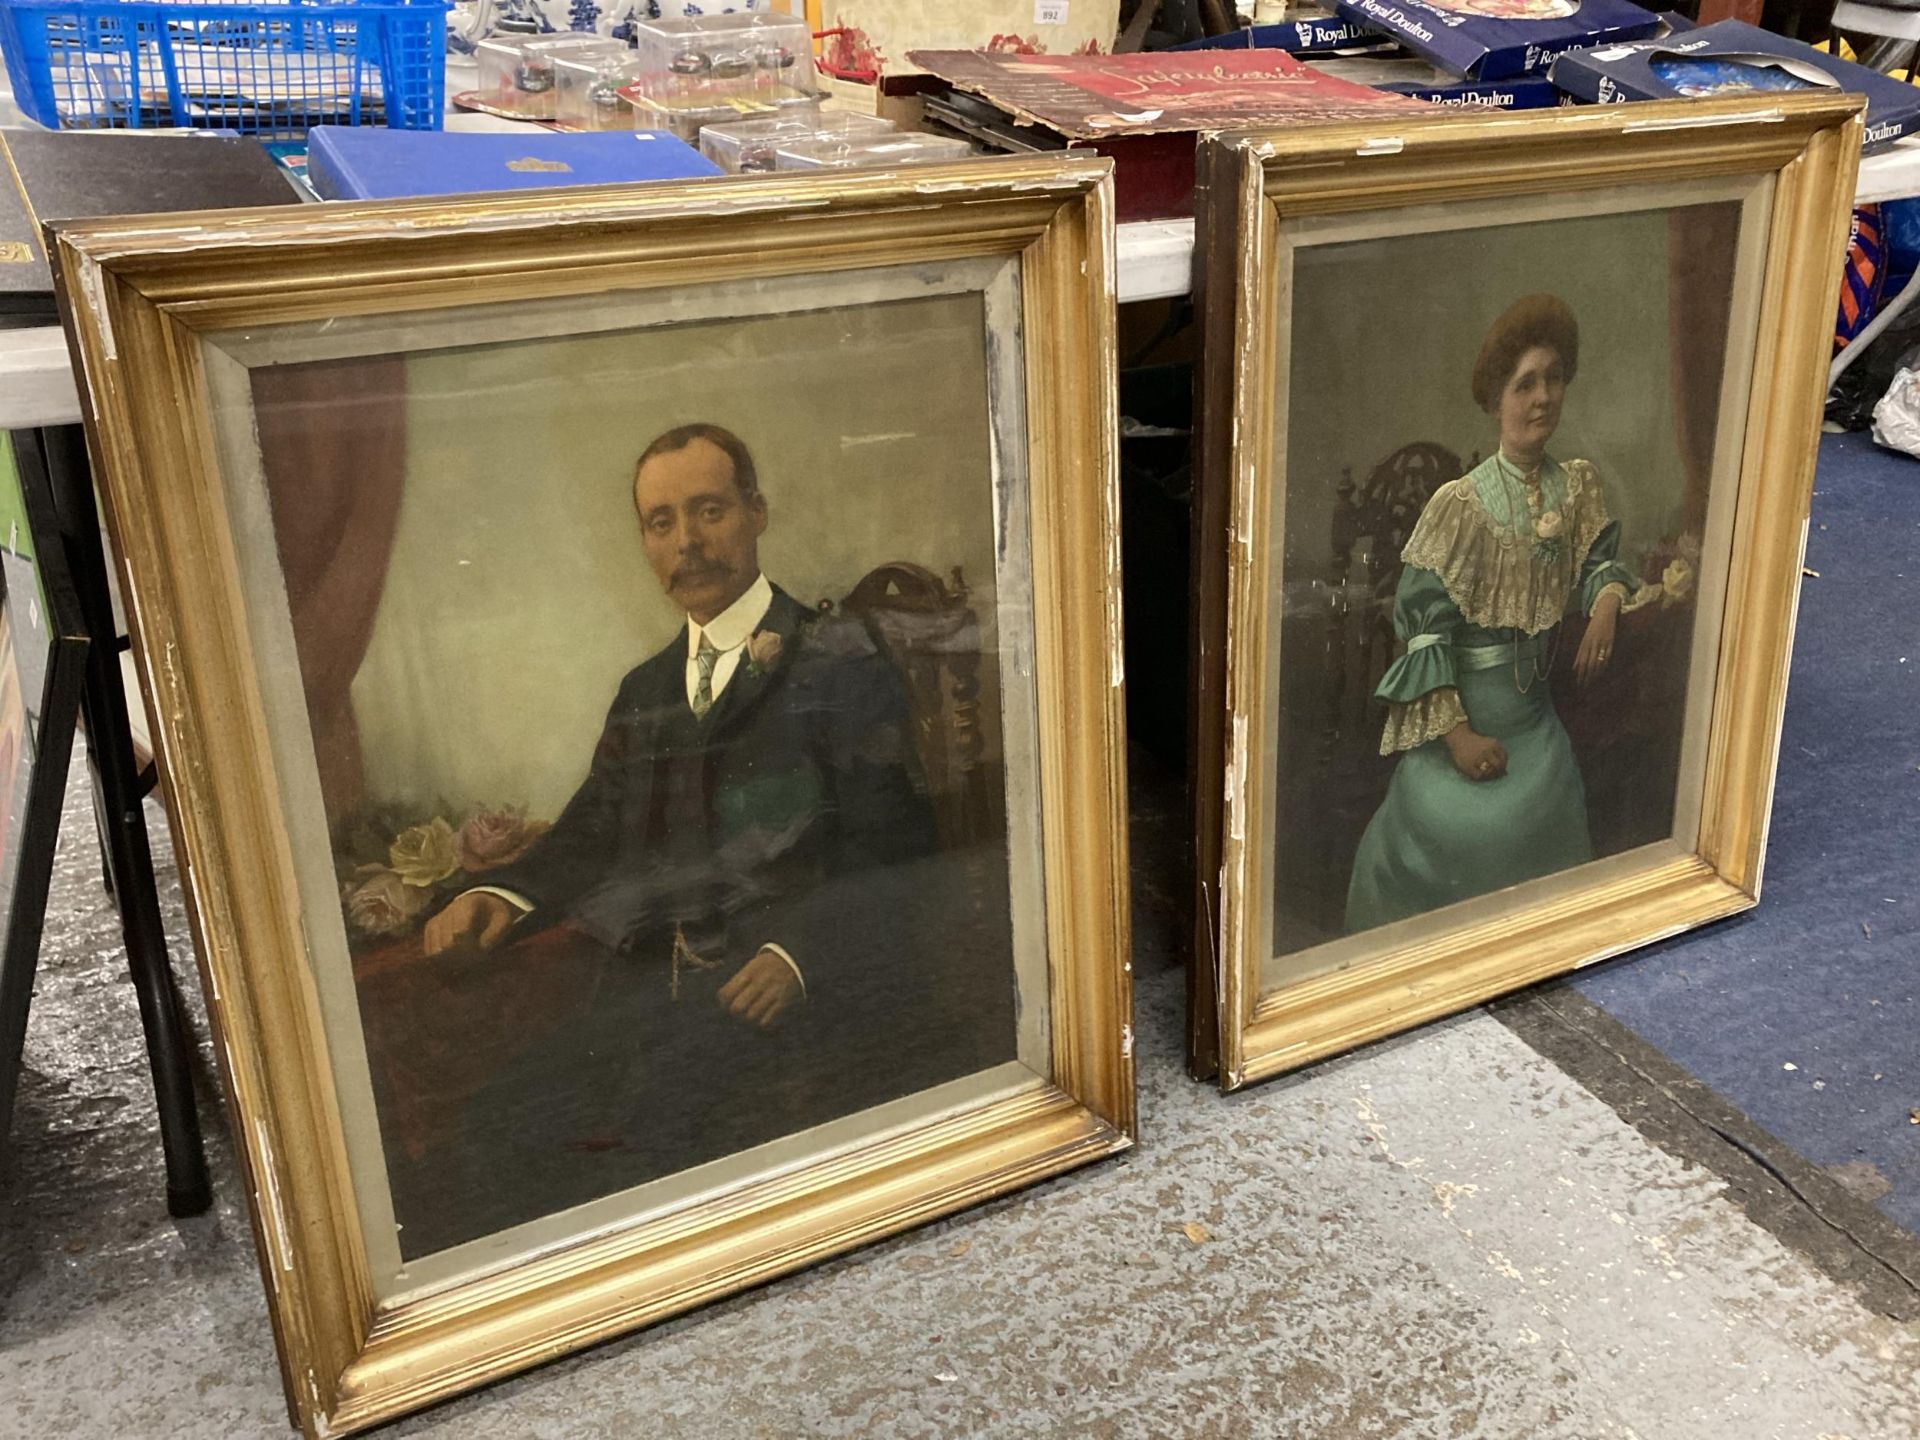 A PAIR OF HAND TINTED EDWARDIAN PORTRAITS OF AN EDWARDIAN COUPLE IN GILT FRAMES - 67CM X 79CM